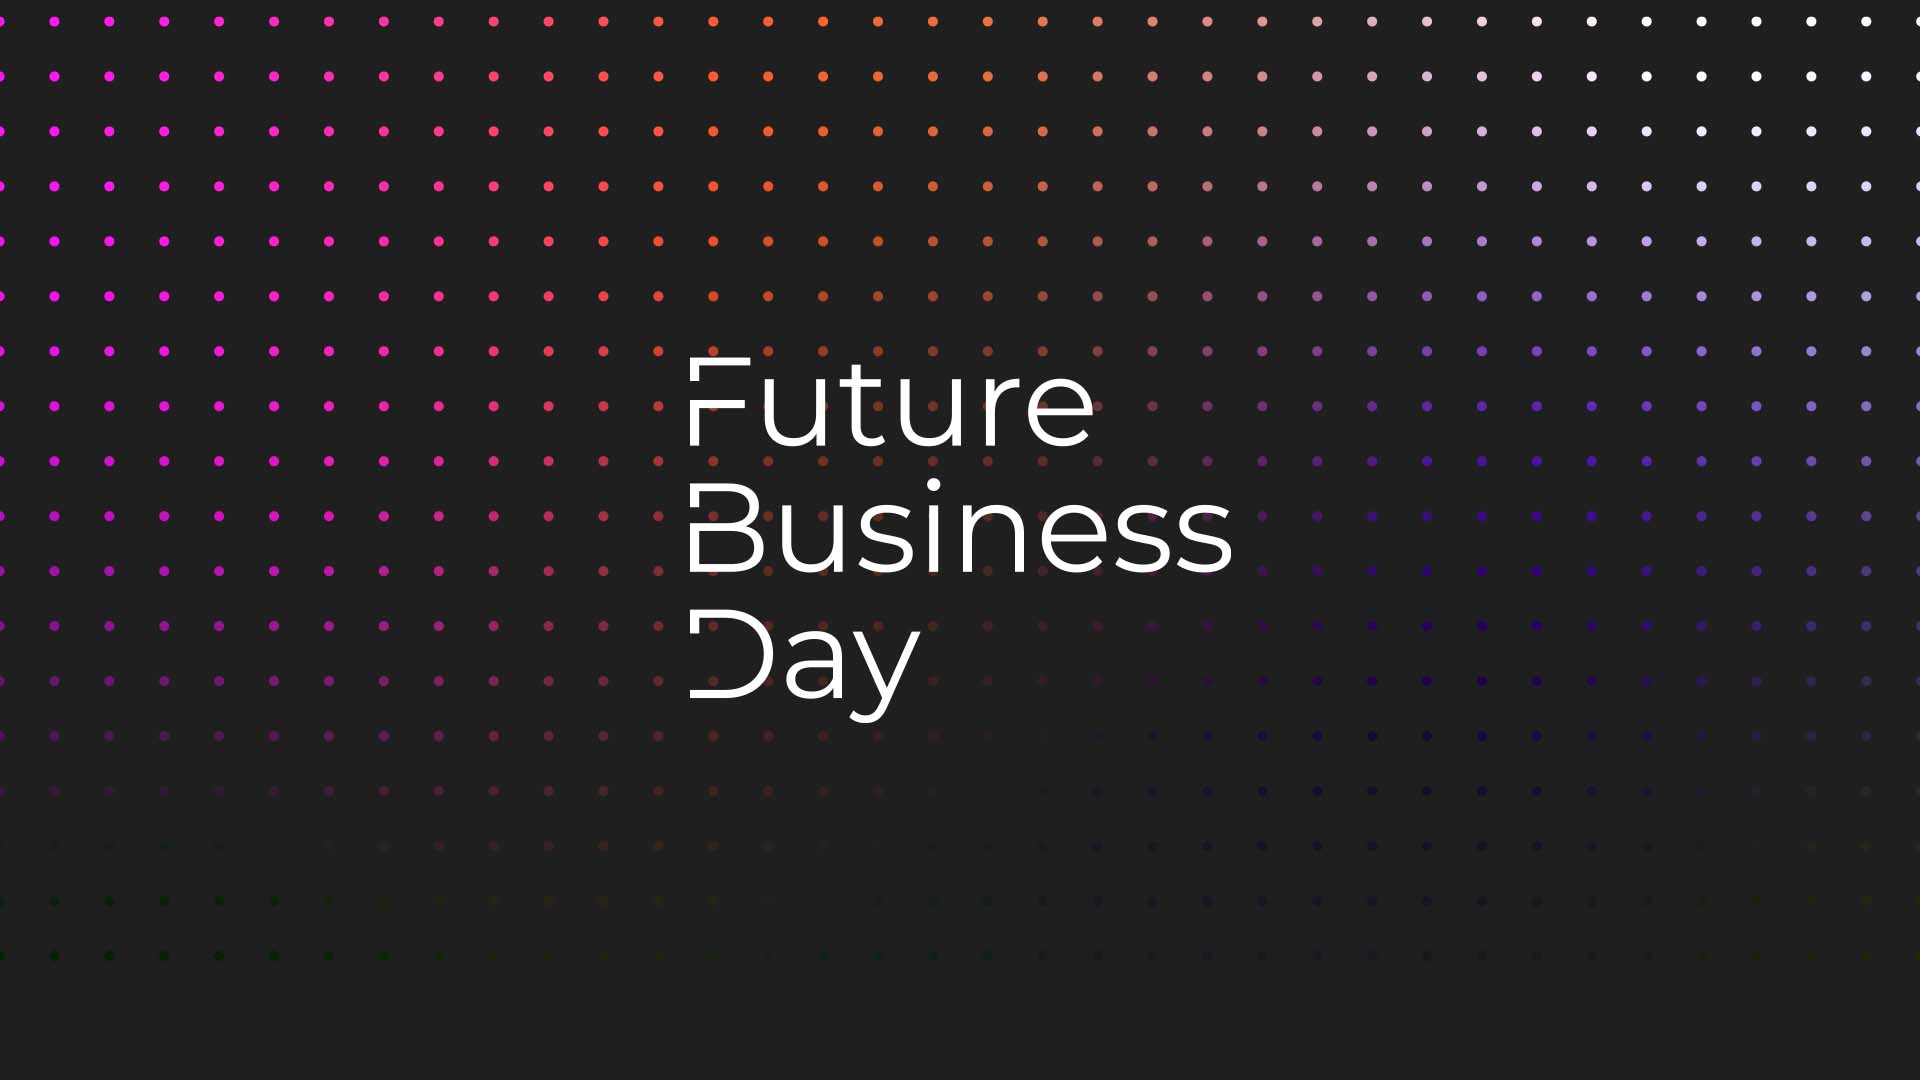 Future Business Day 2021